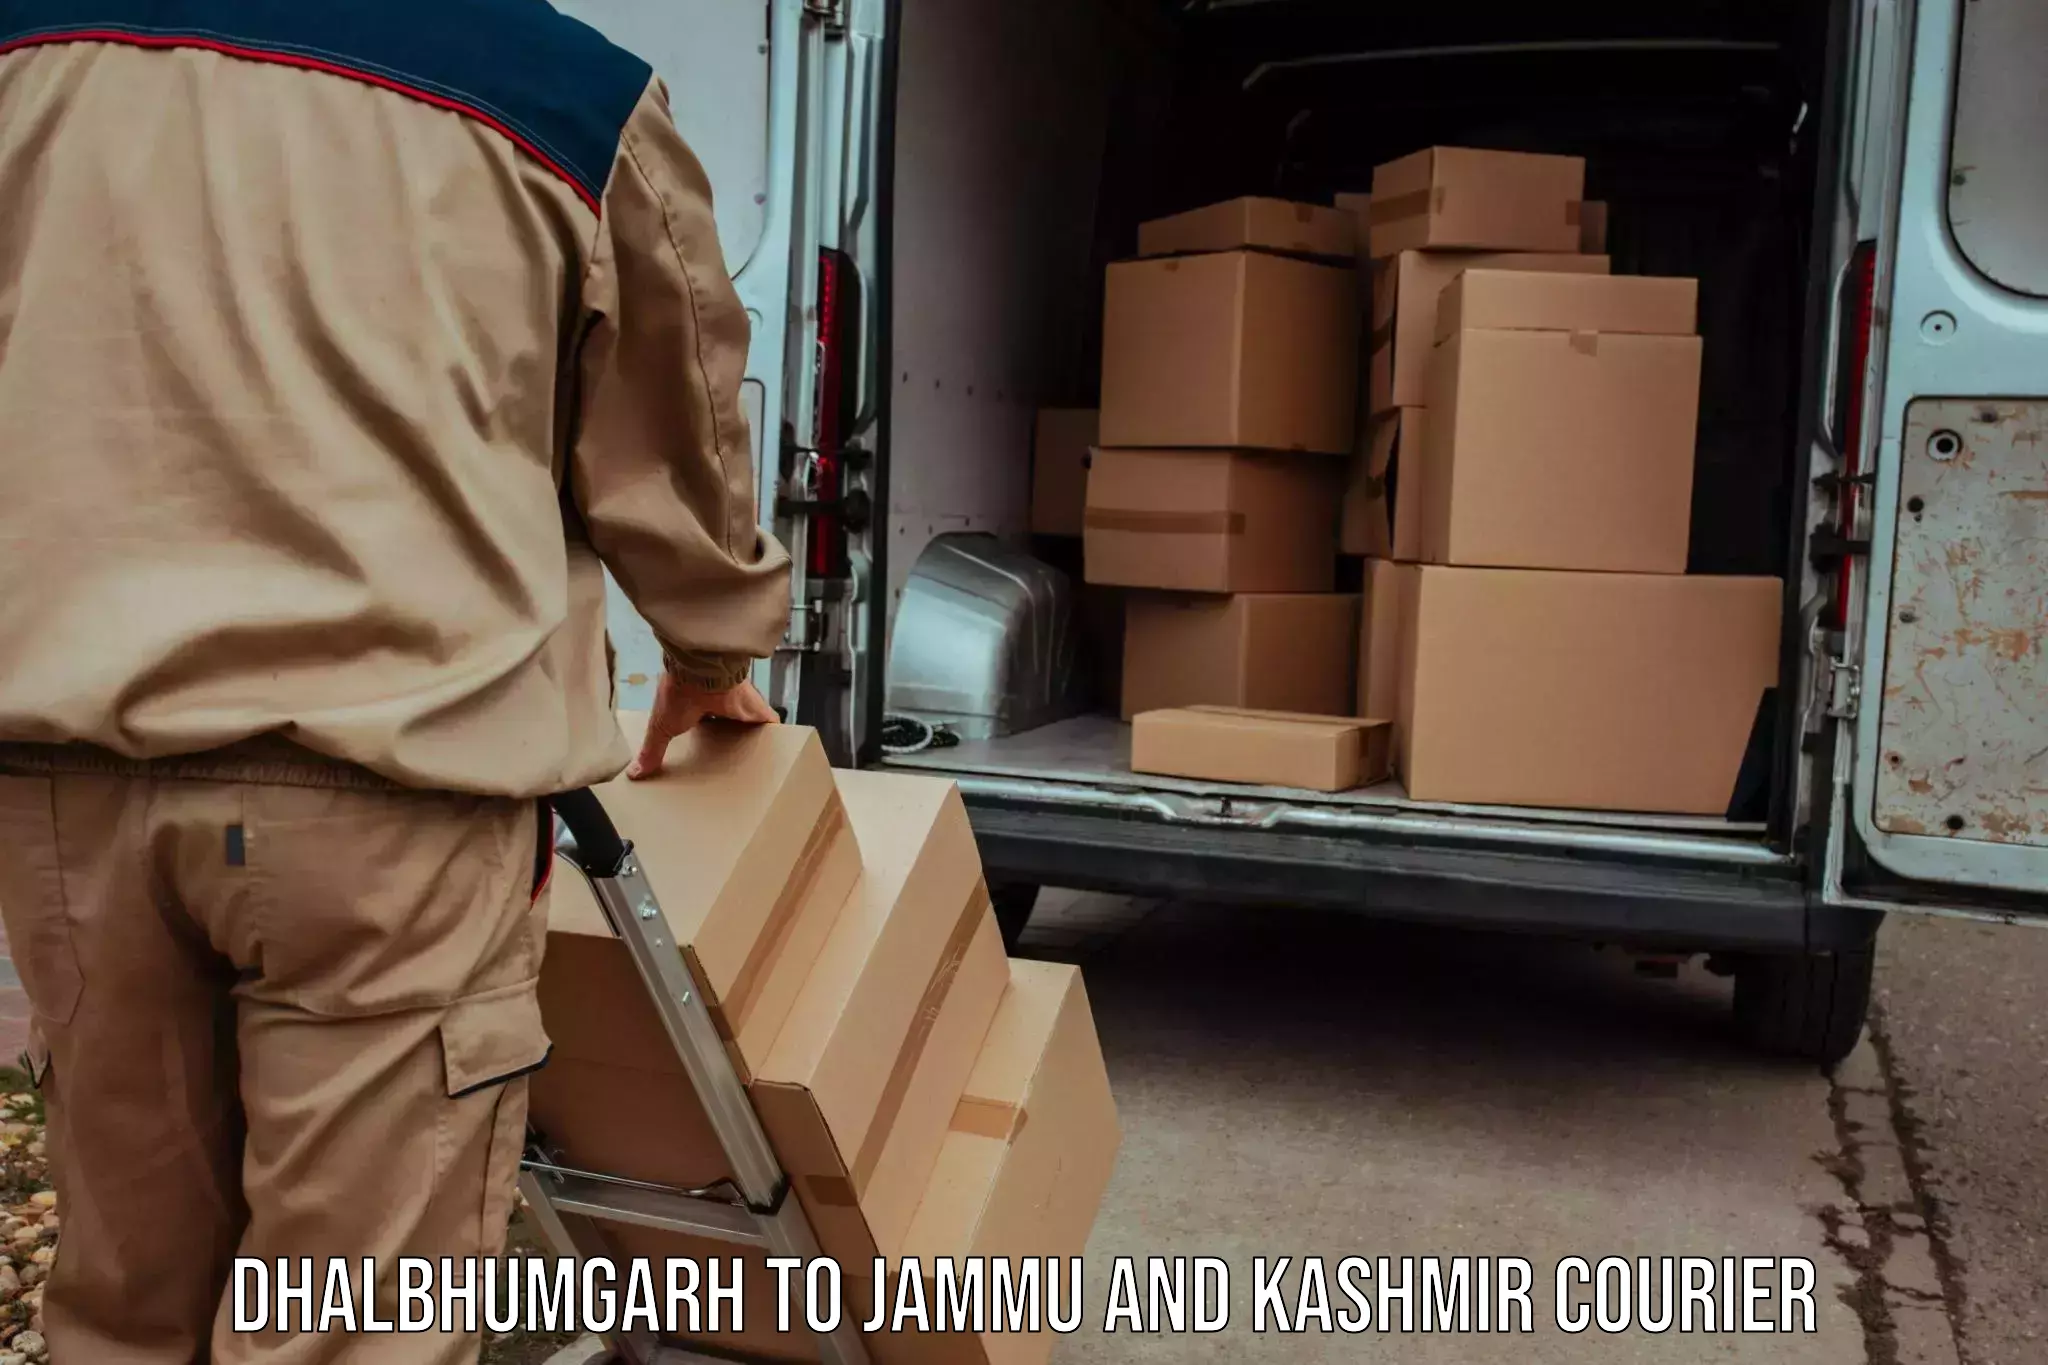 Easy access courier services Dhalbhumgarh to Leh